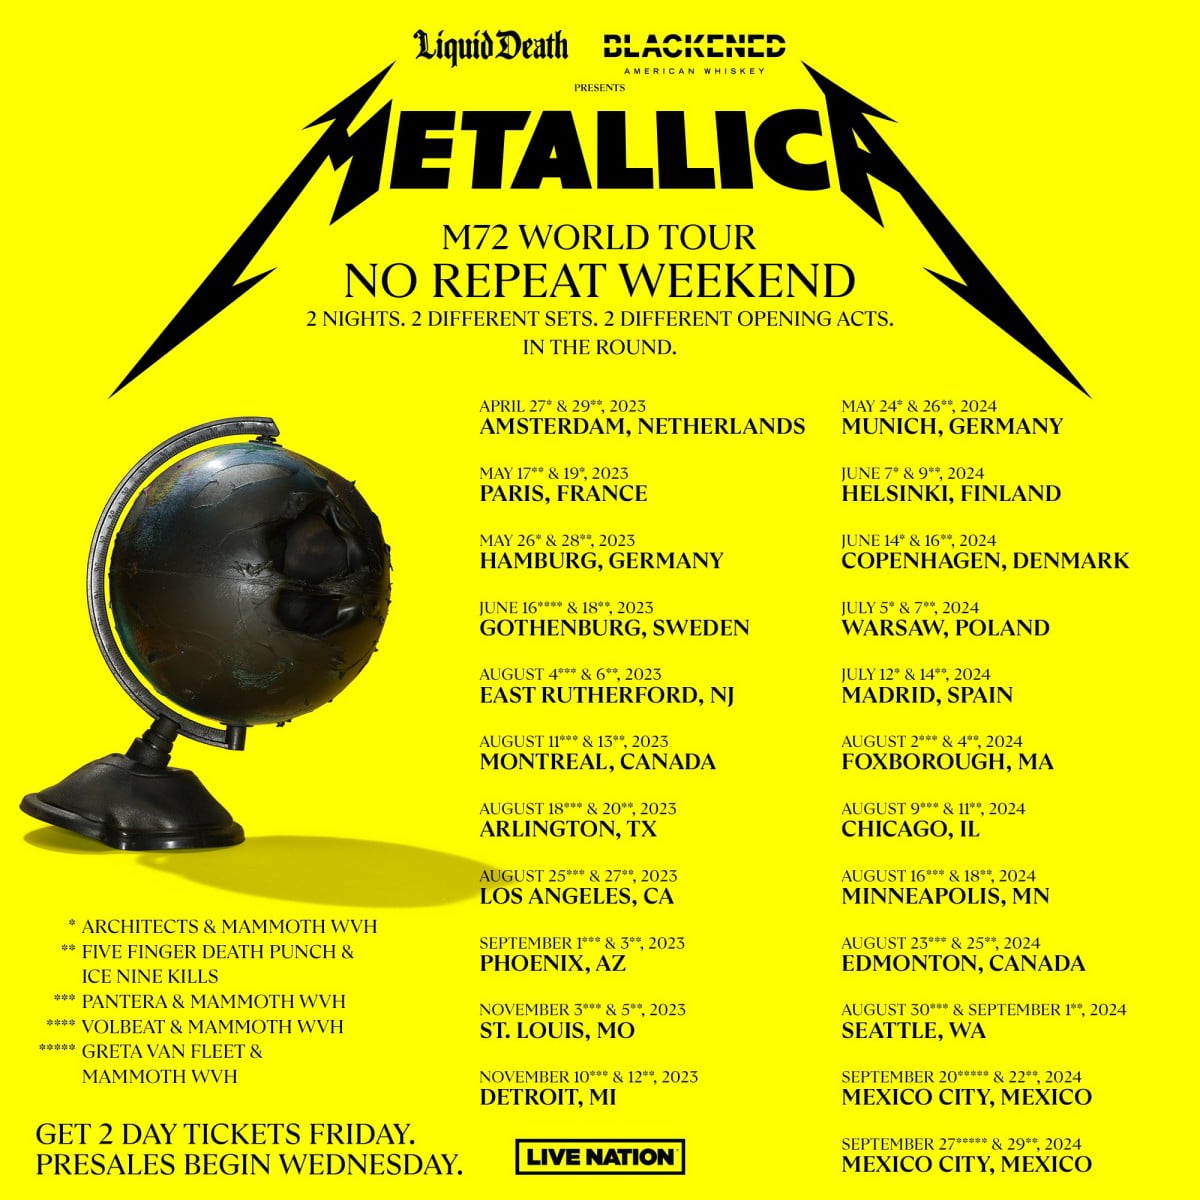 Metallica M72 Tour dates for 2023 and 2024